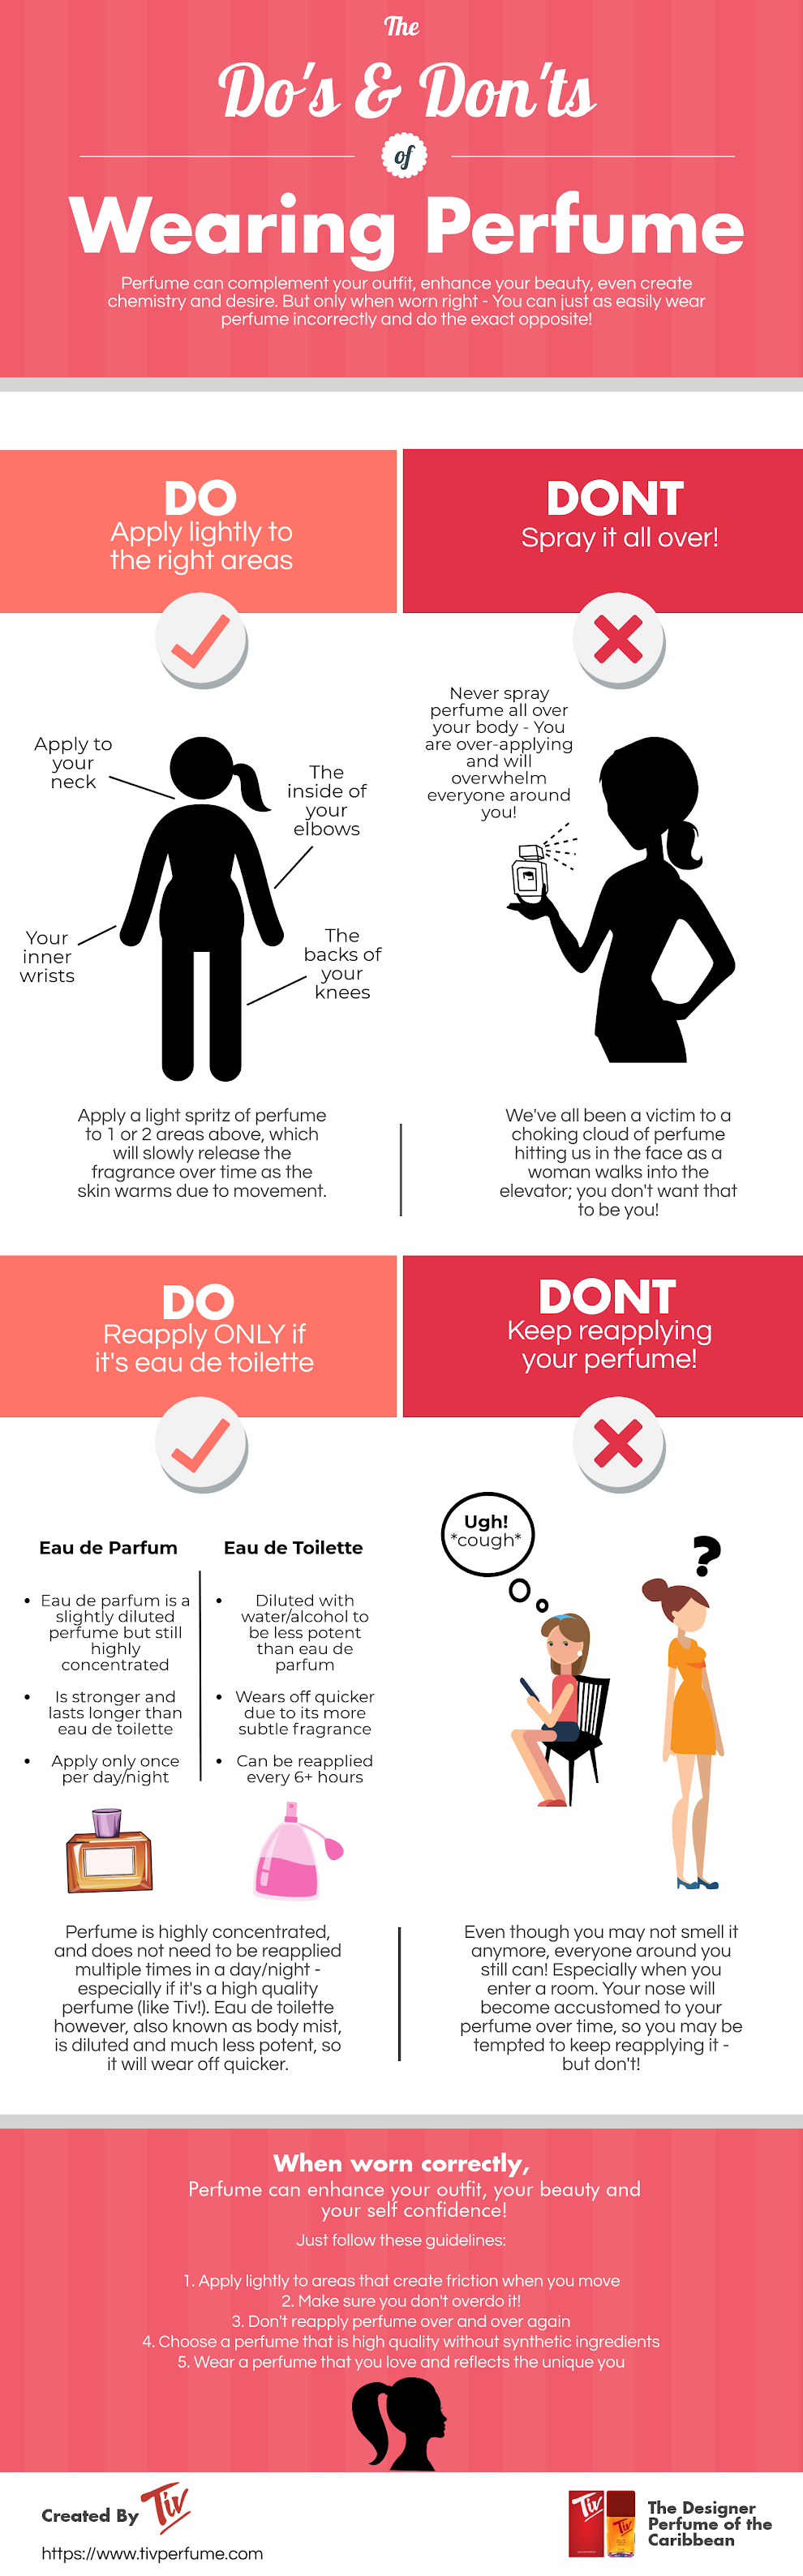 How To Wear Your Perfume #Infographic